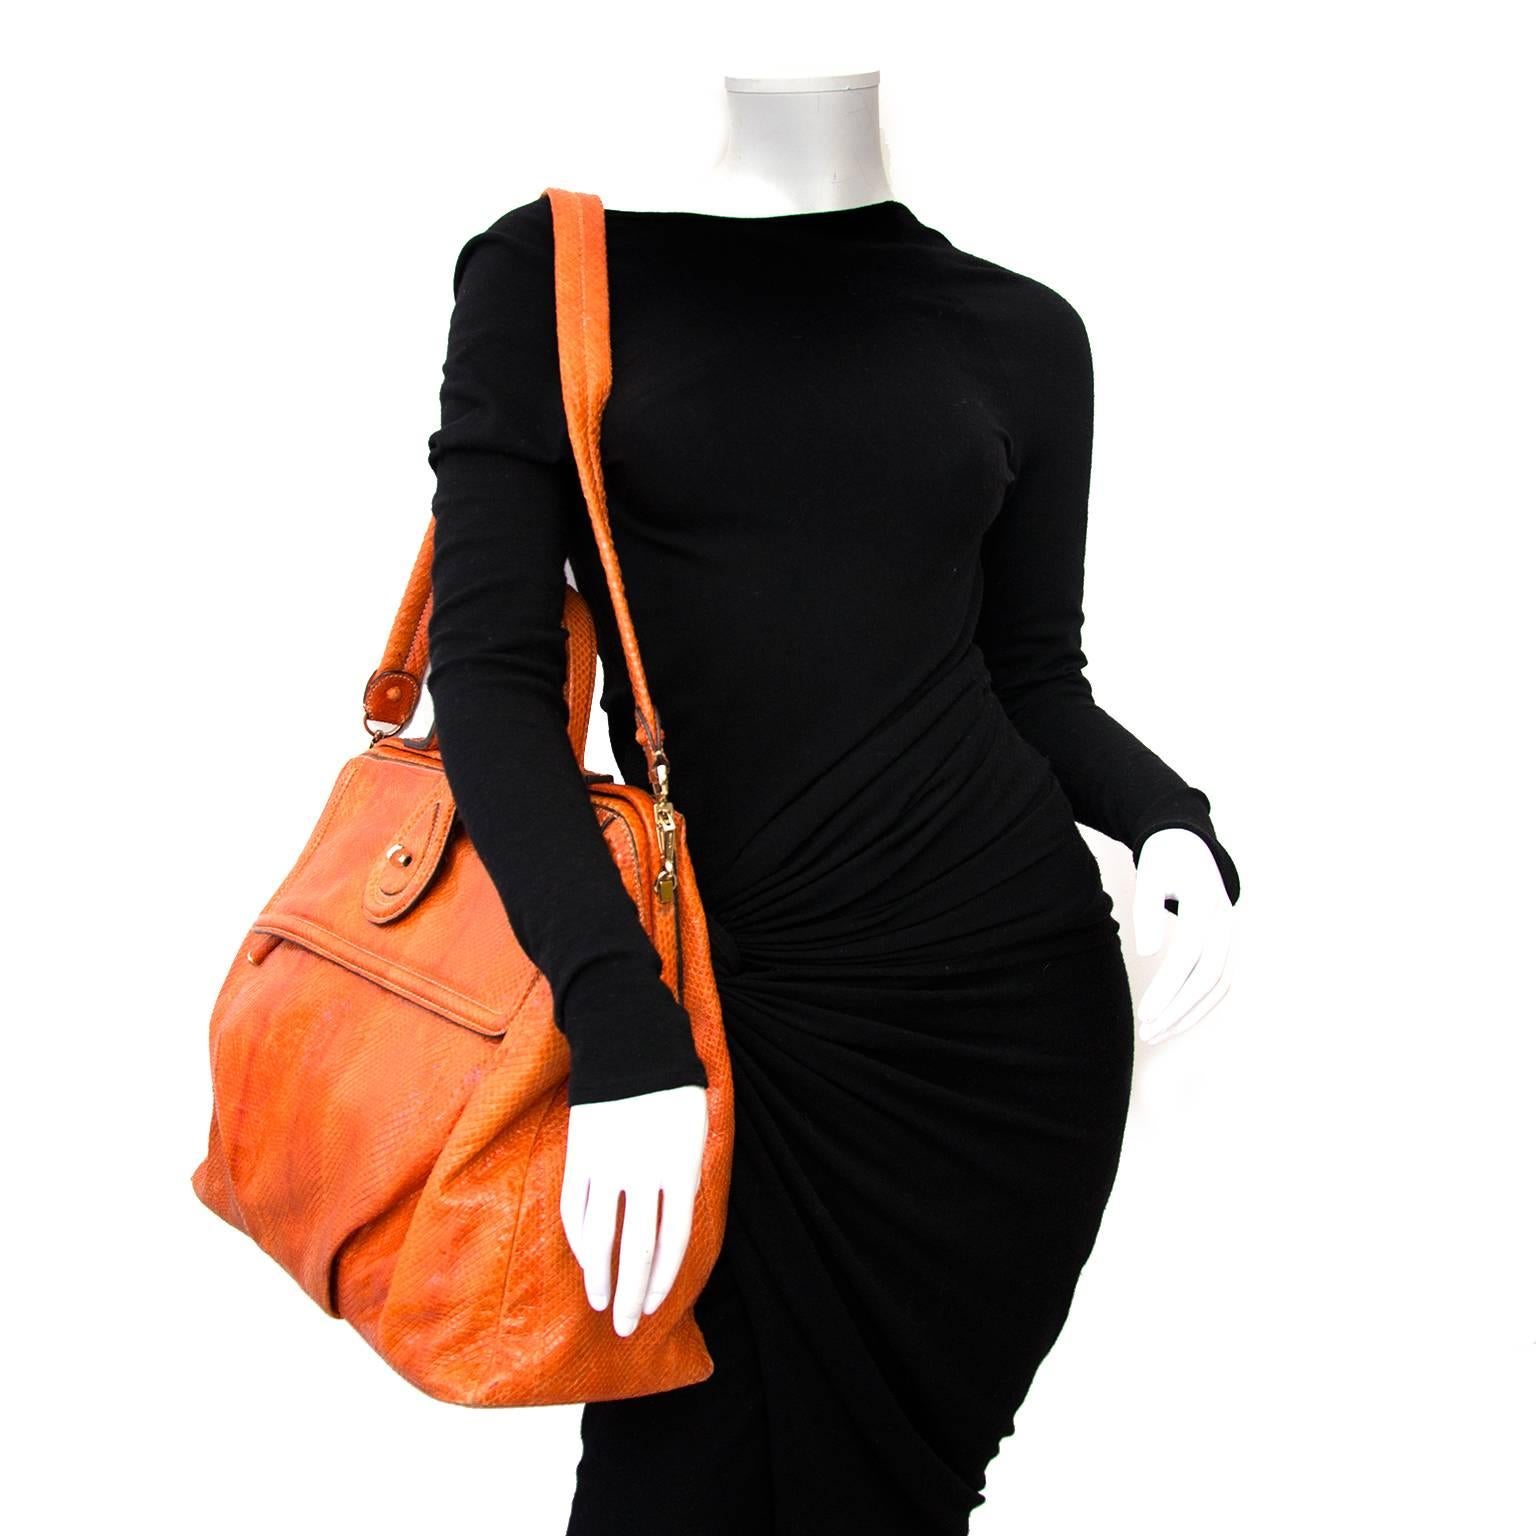 Zagliani Orange Python Large Hobo Bag

ZIconic Puffy Zagliani hobo bag in a extra large size.  Volluminous shape that can carry all the day’s essentials. One top handles. Two compartments and twist lock closure. Internal zip pocket and two pouch